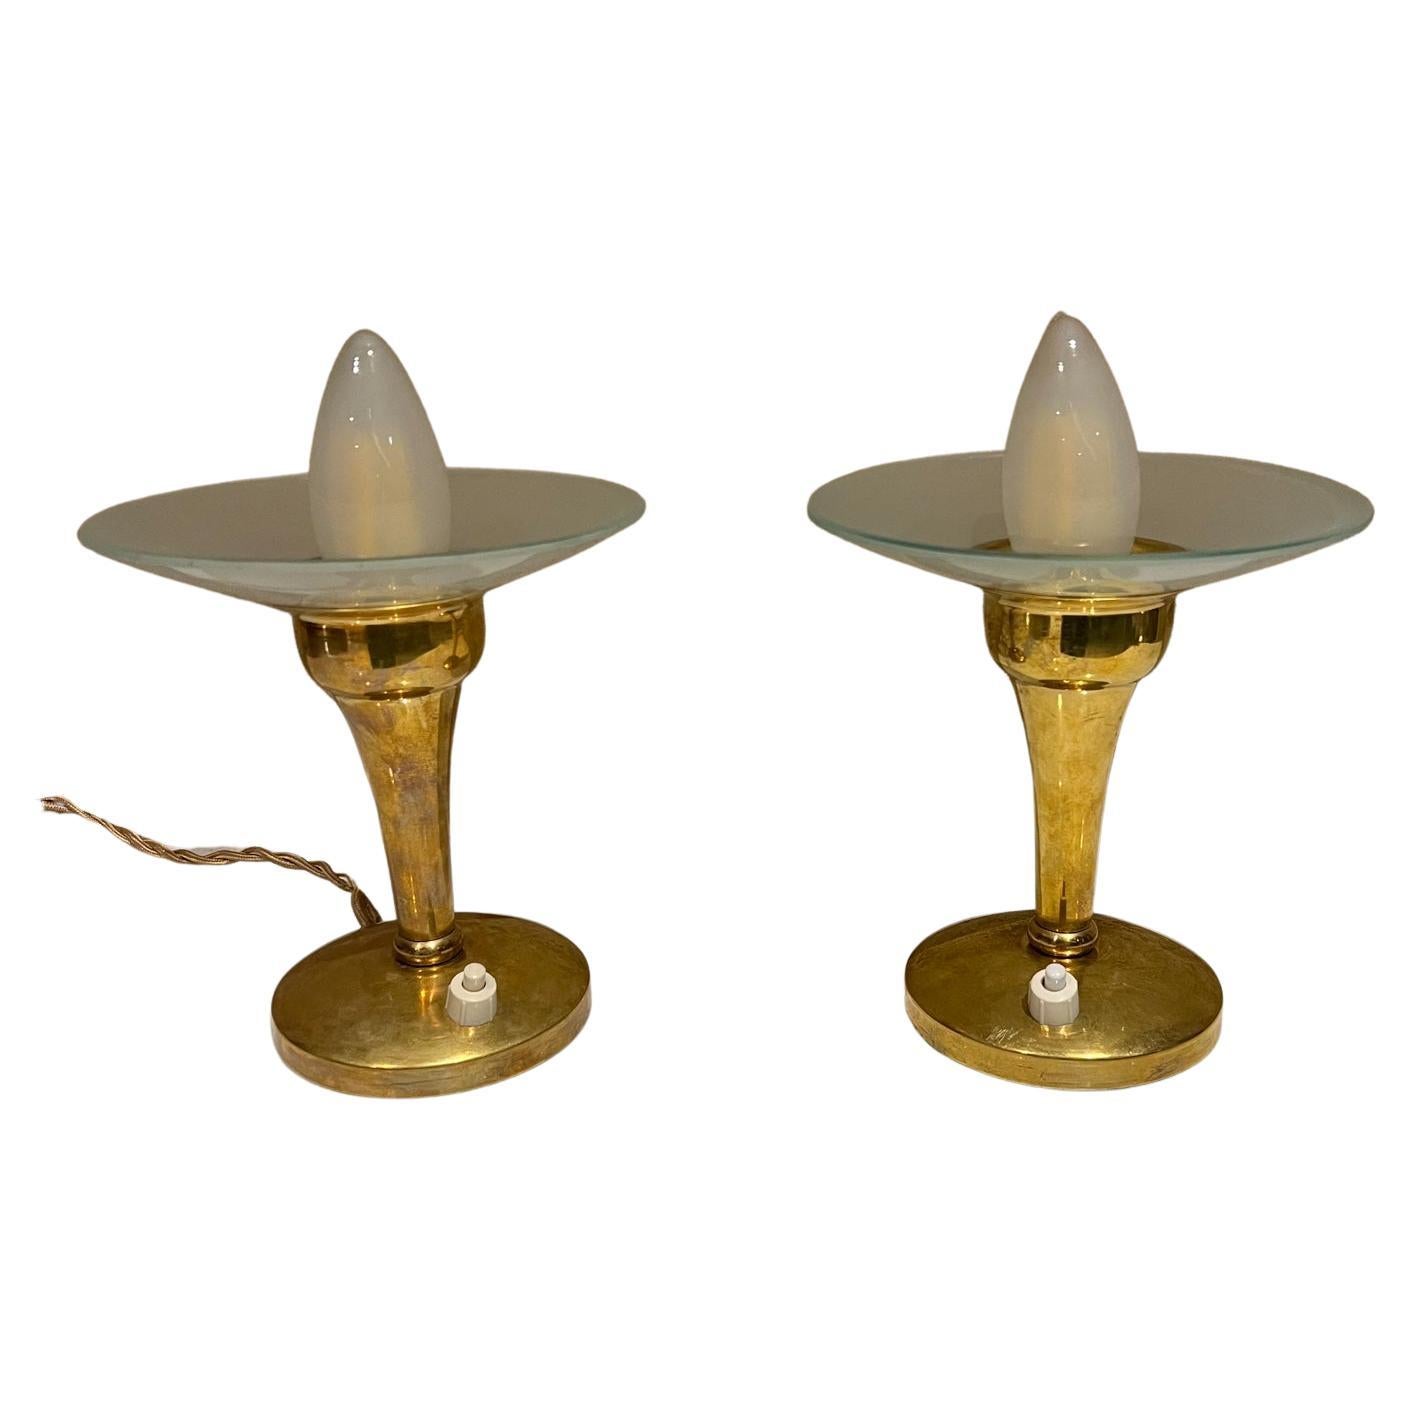 1950s Italian brass table lamps Style of Gio Ponti Fontana Arte Italy
Brass body with custom glass shade. Push on and off button
Unmarked. US ready.
5.75 tall x 5.5 diameter without bulb
Preowned vintage condition. Rewired new plug and new